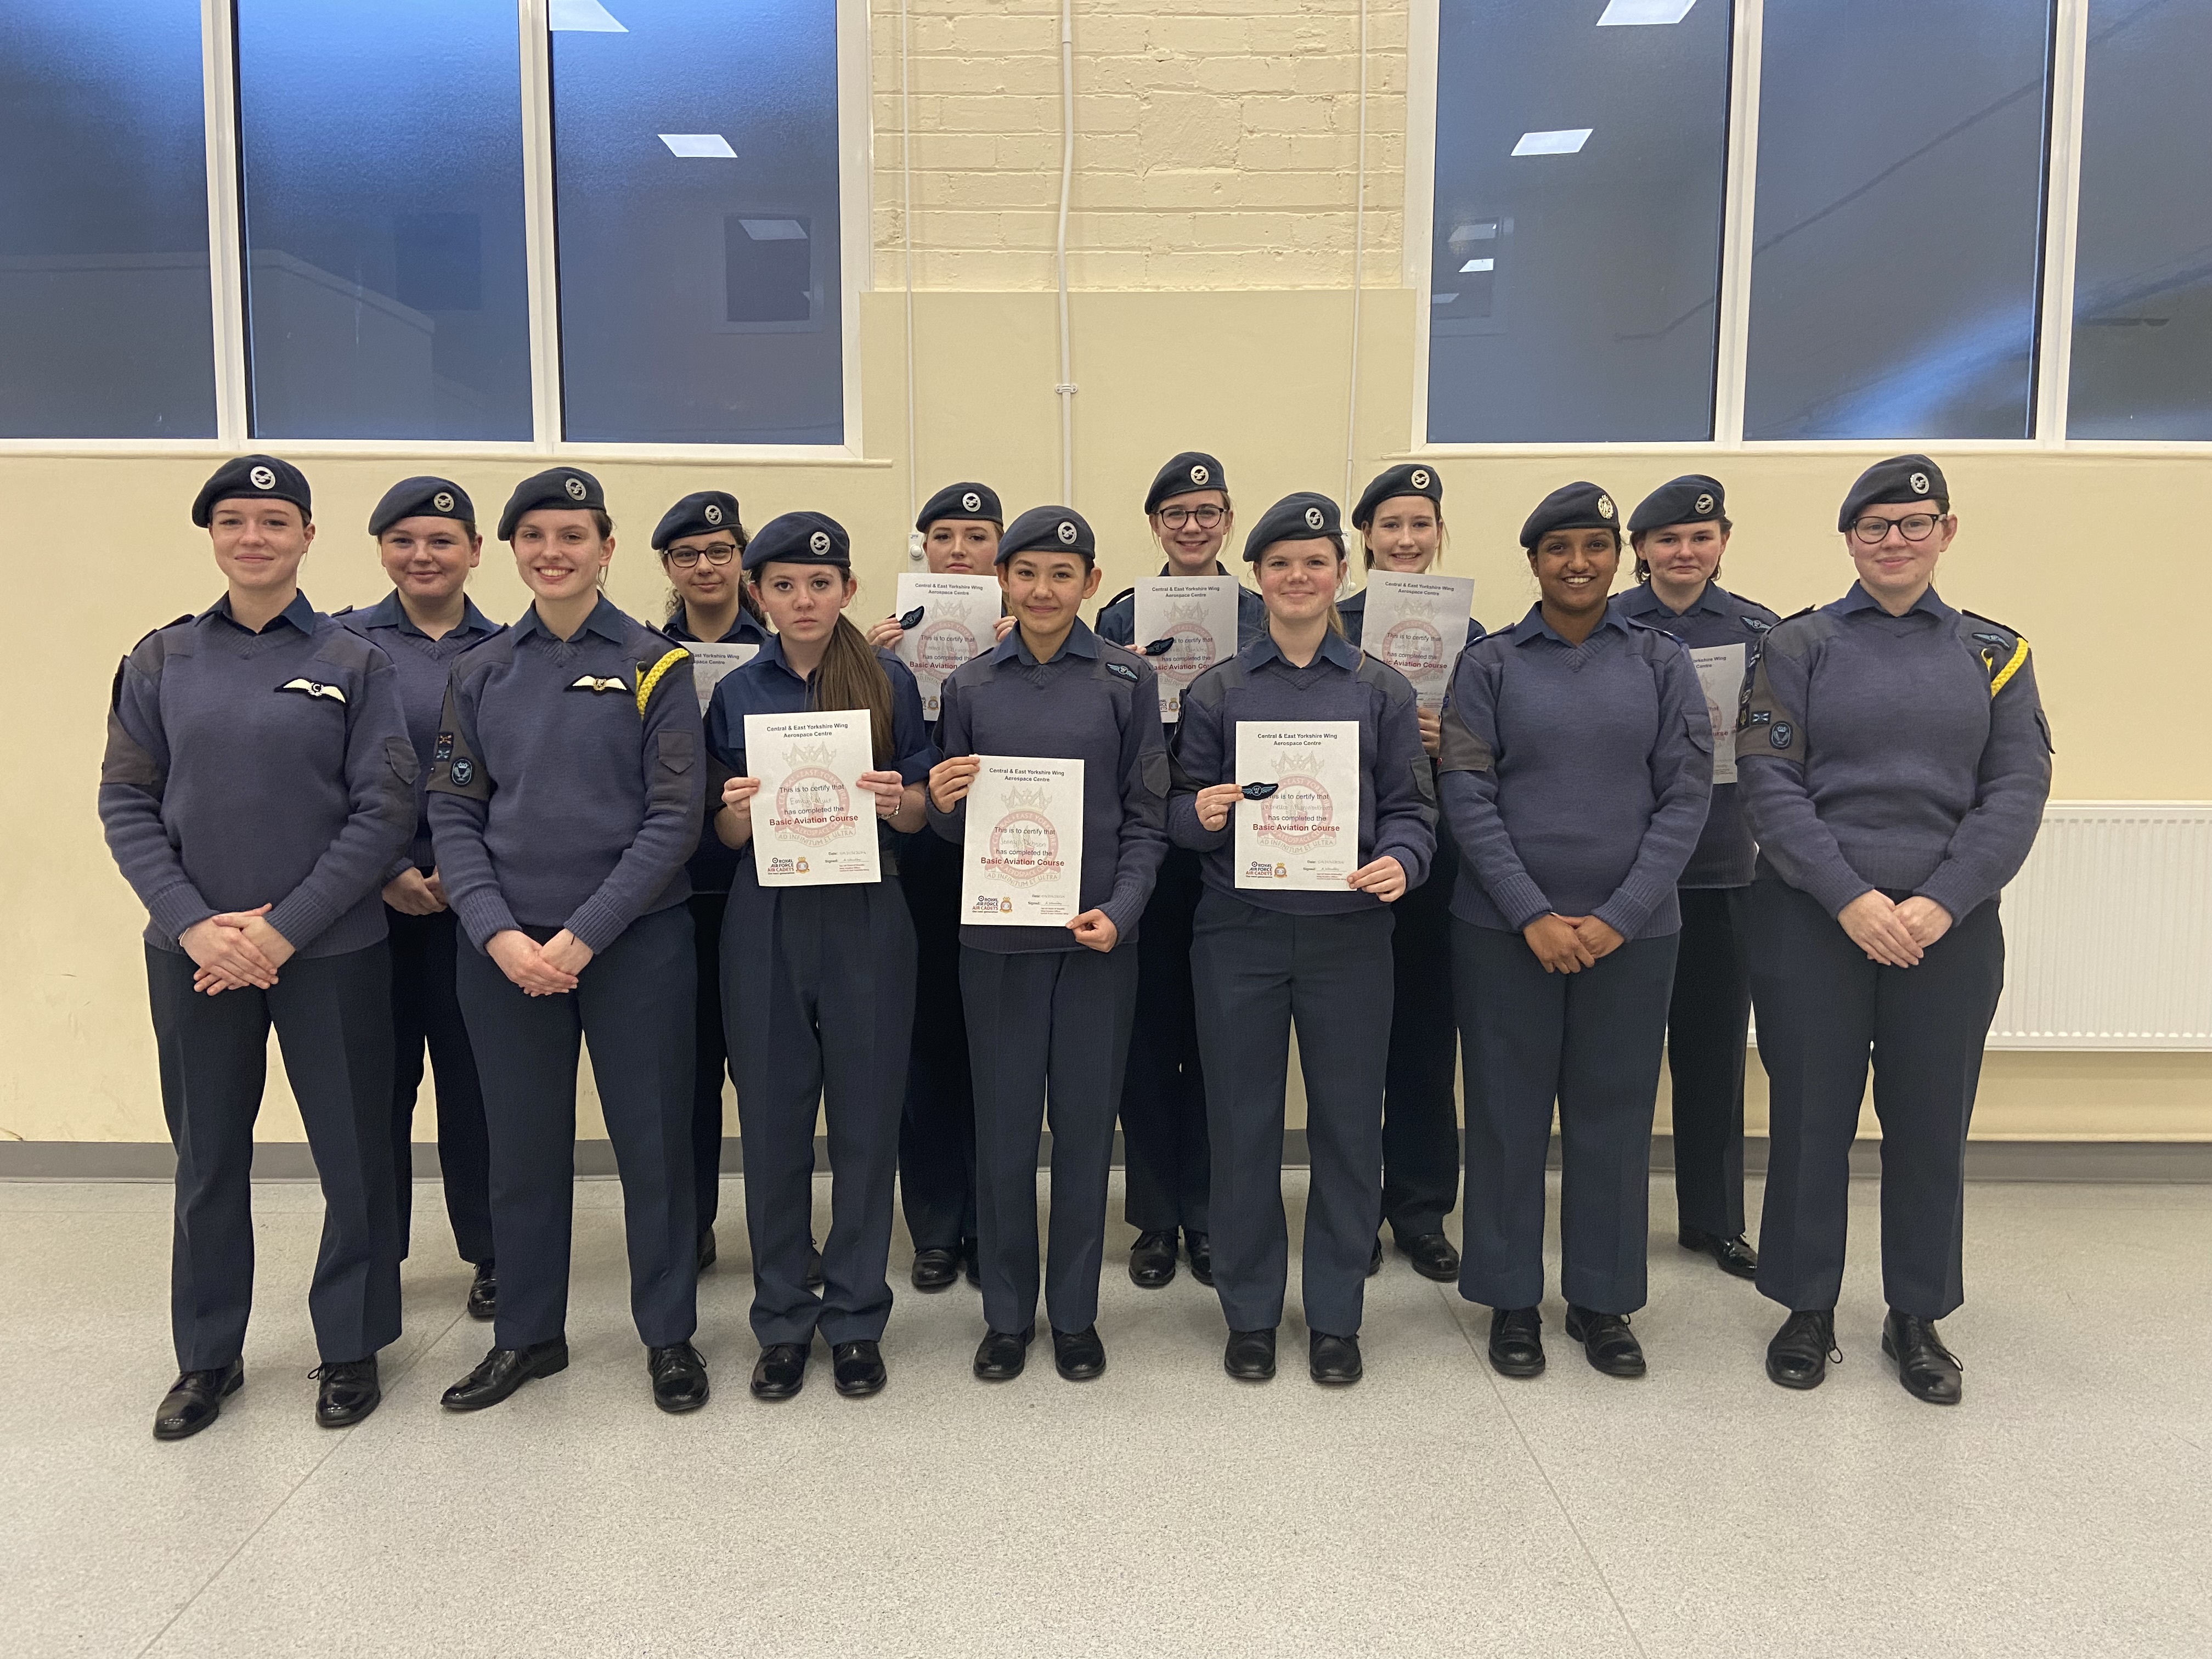 AIr Cadets stood with course certificates